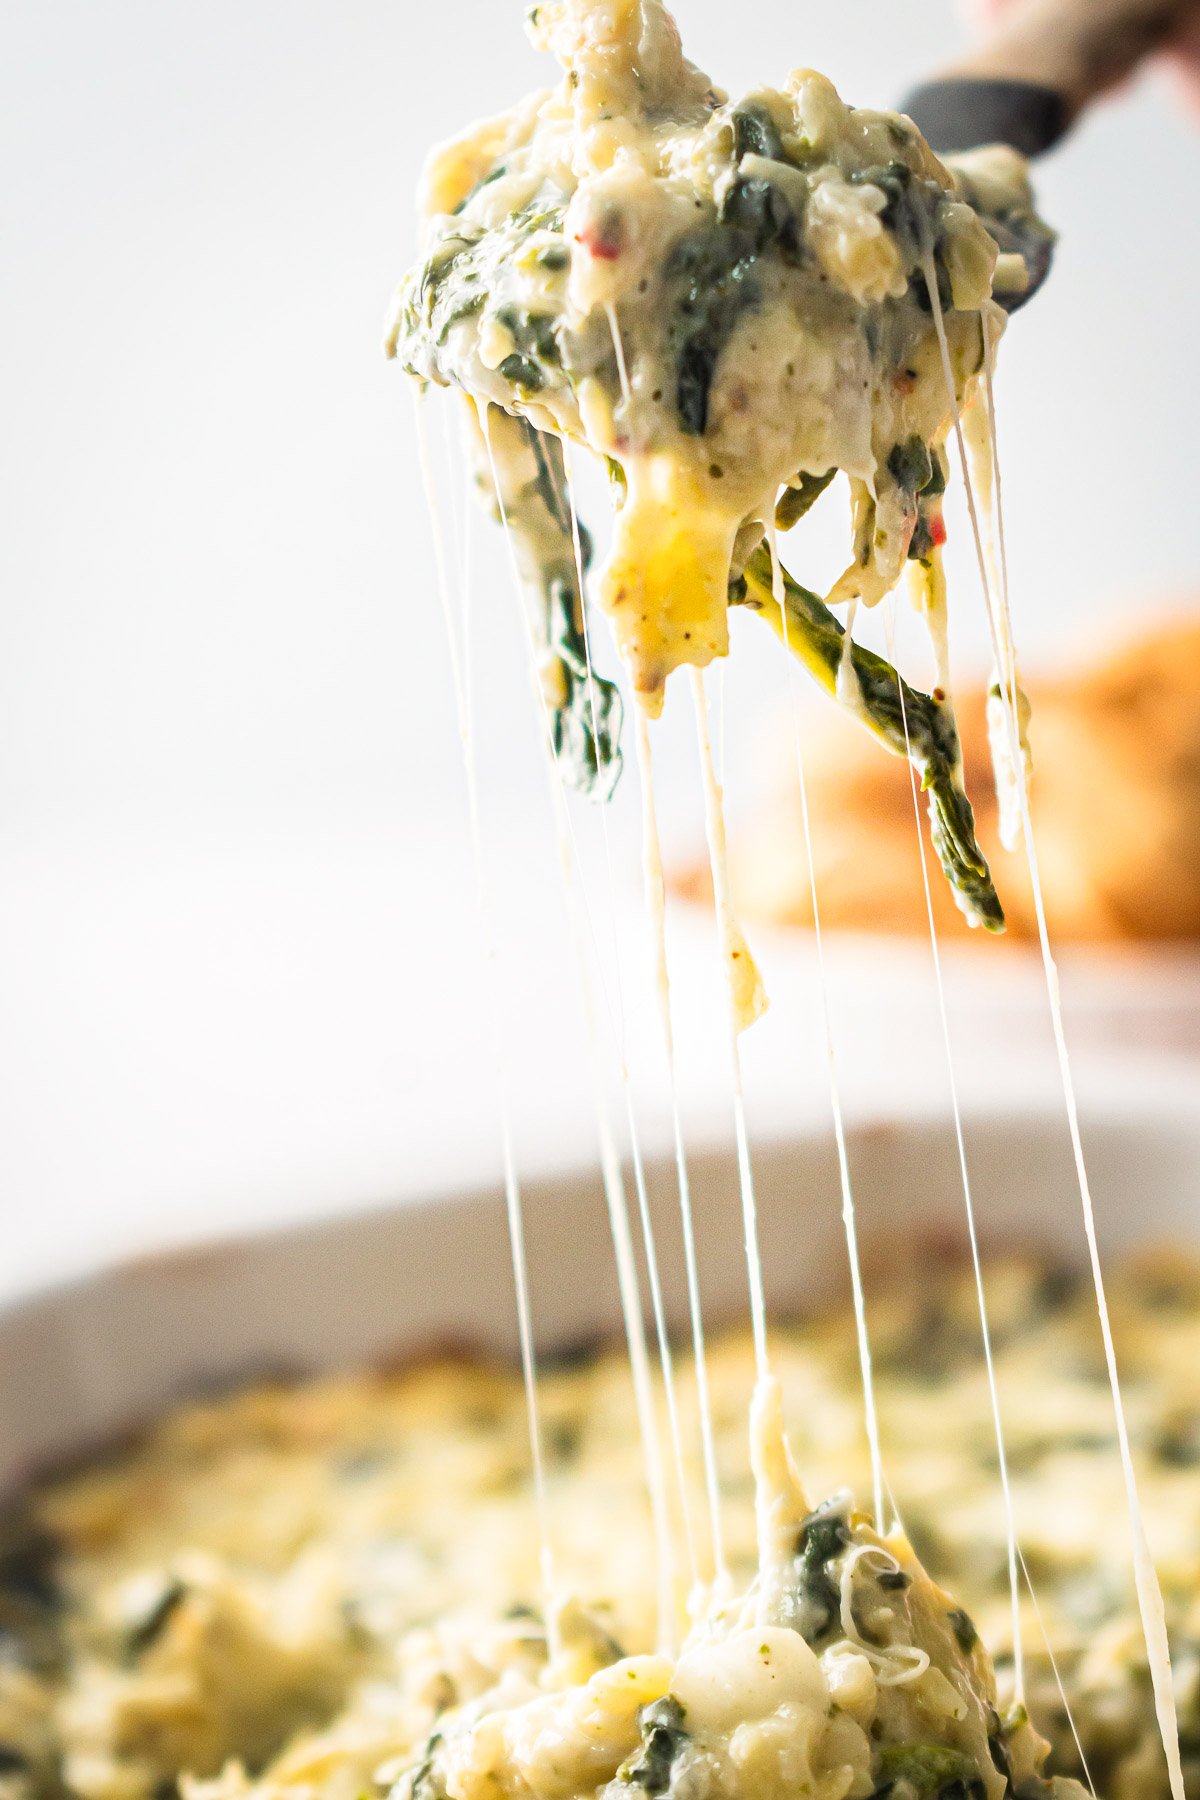 Oven baked healthy spinach artichoke dip being served.